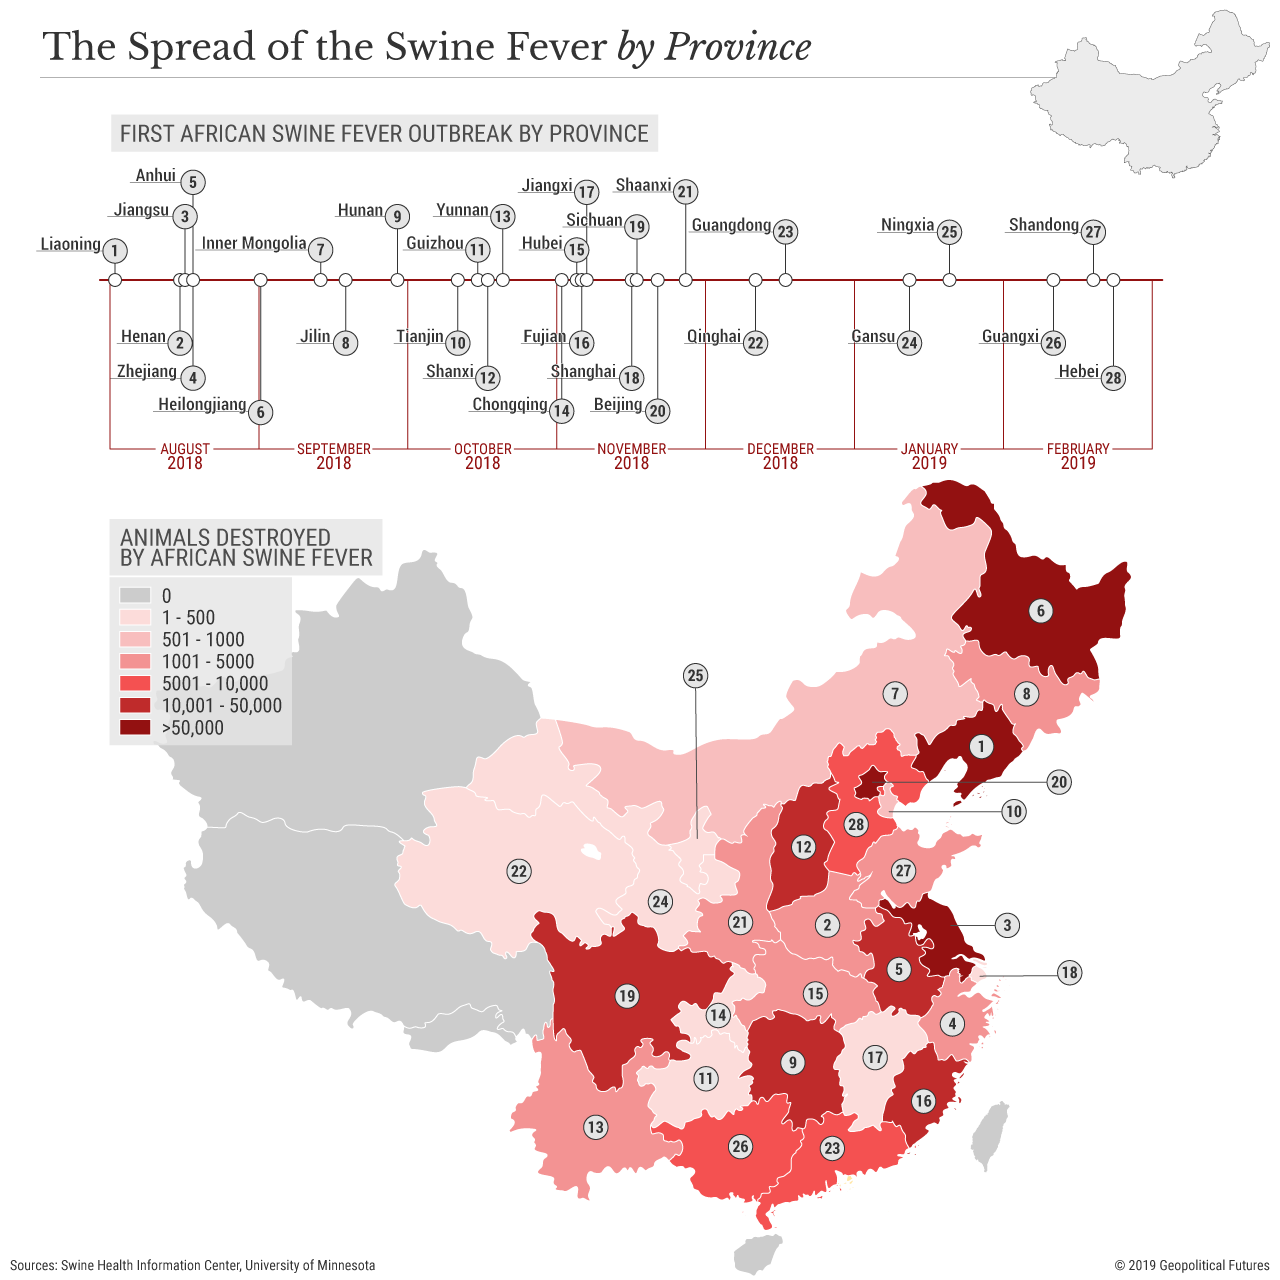 China Struggles to Contain an Outbreak | Geopolitical Futures